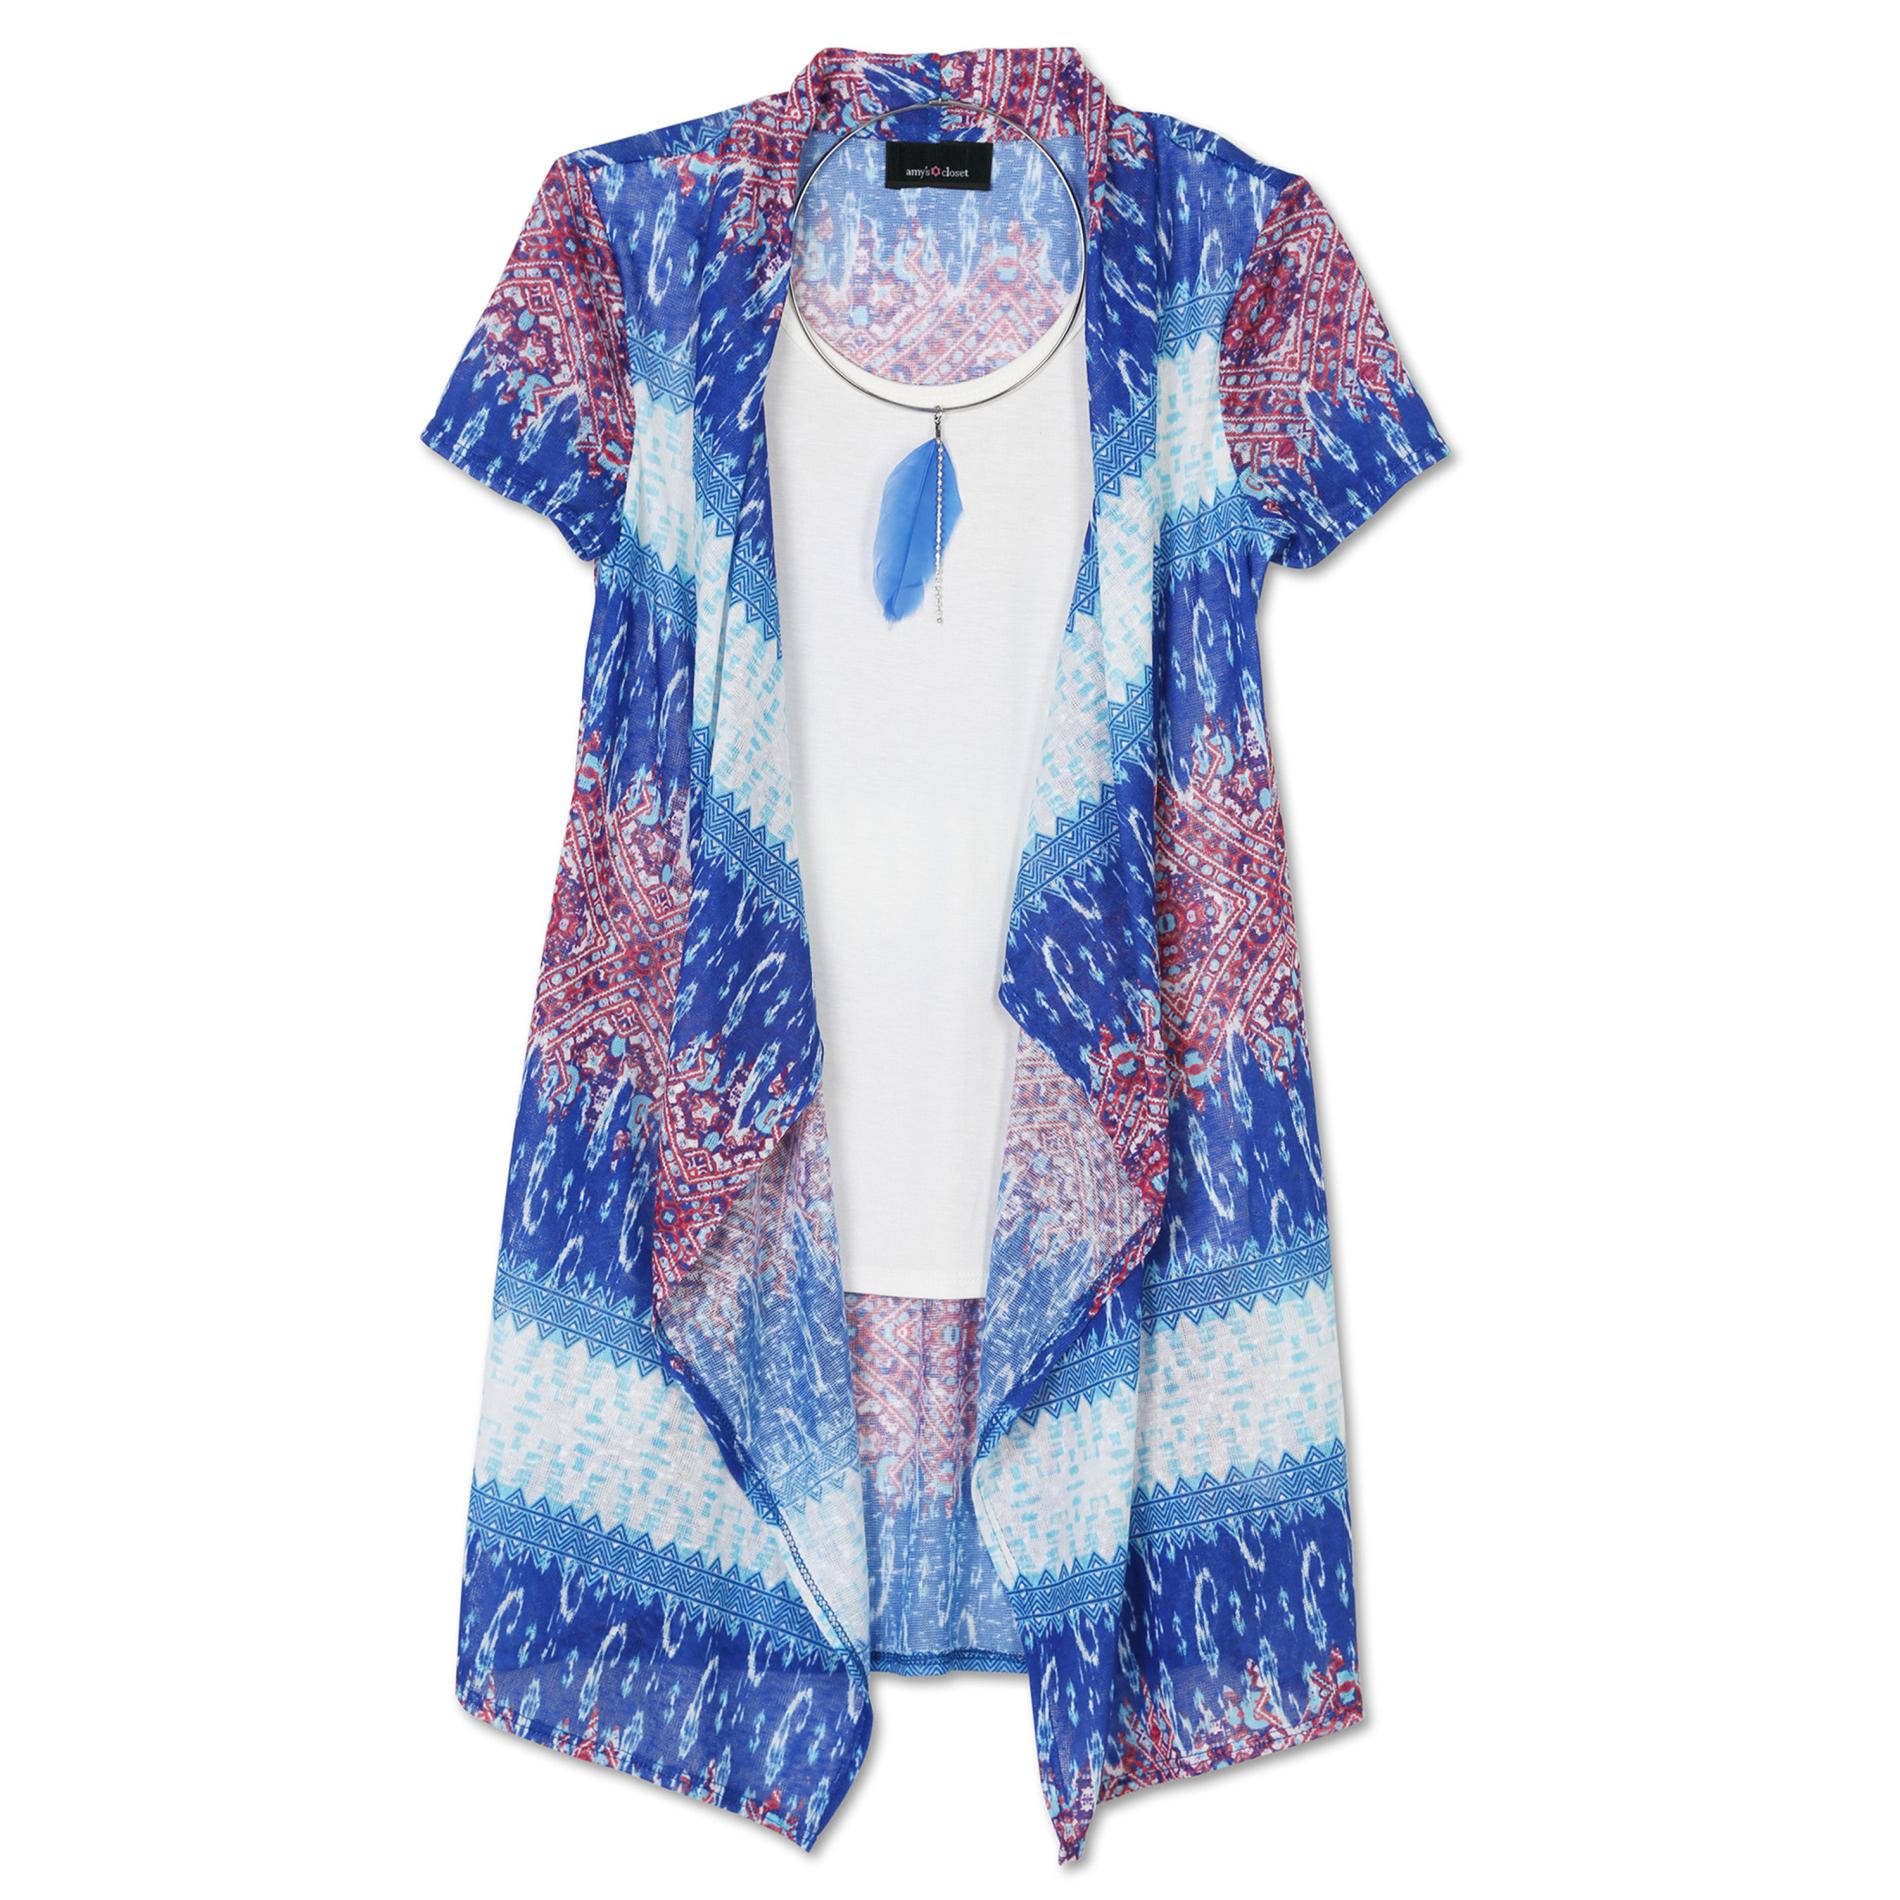 Amy's Closet Girls' Layered-Look Tunic Top & Necklace